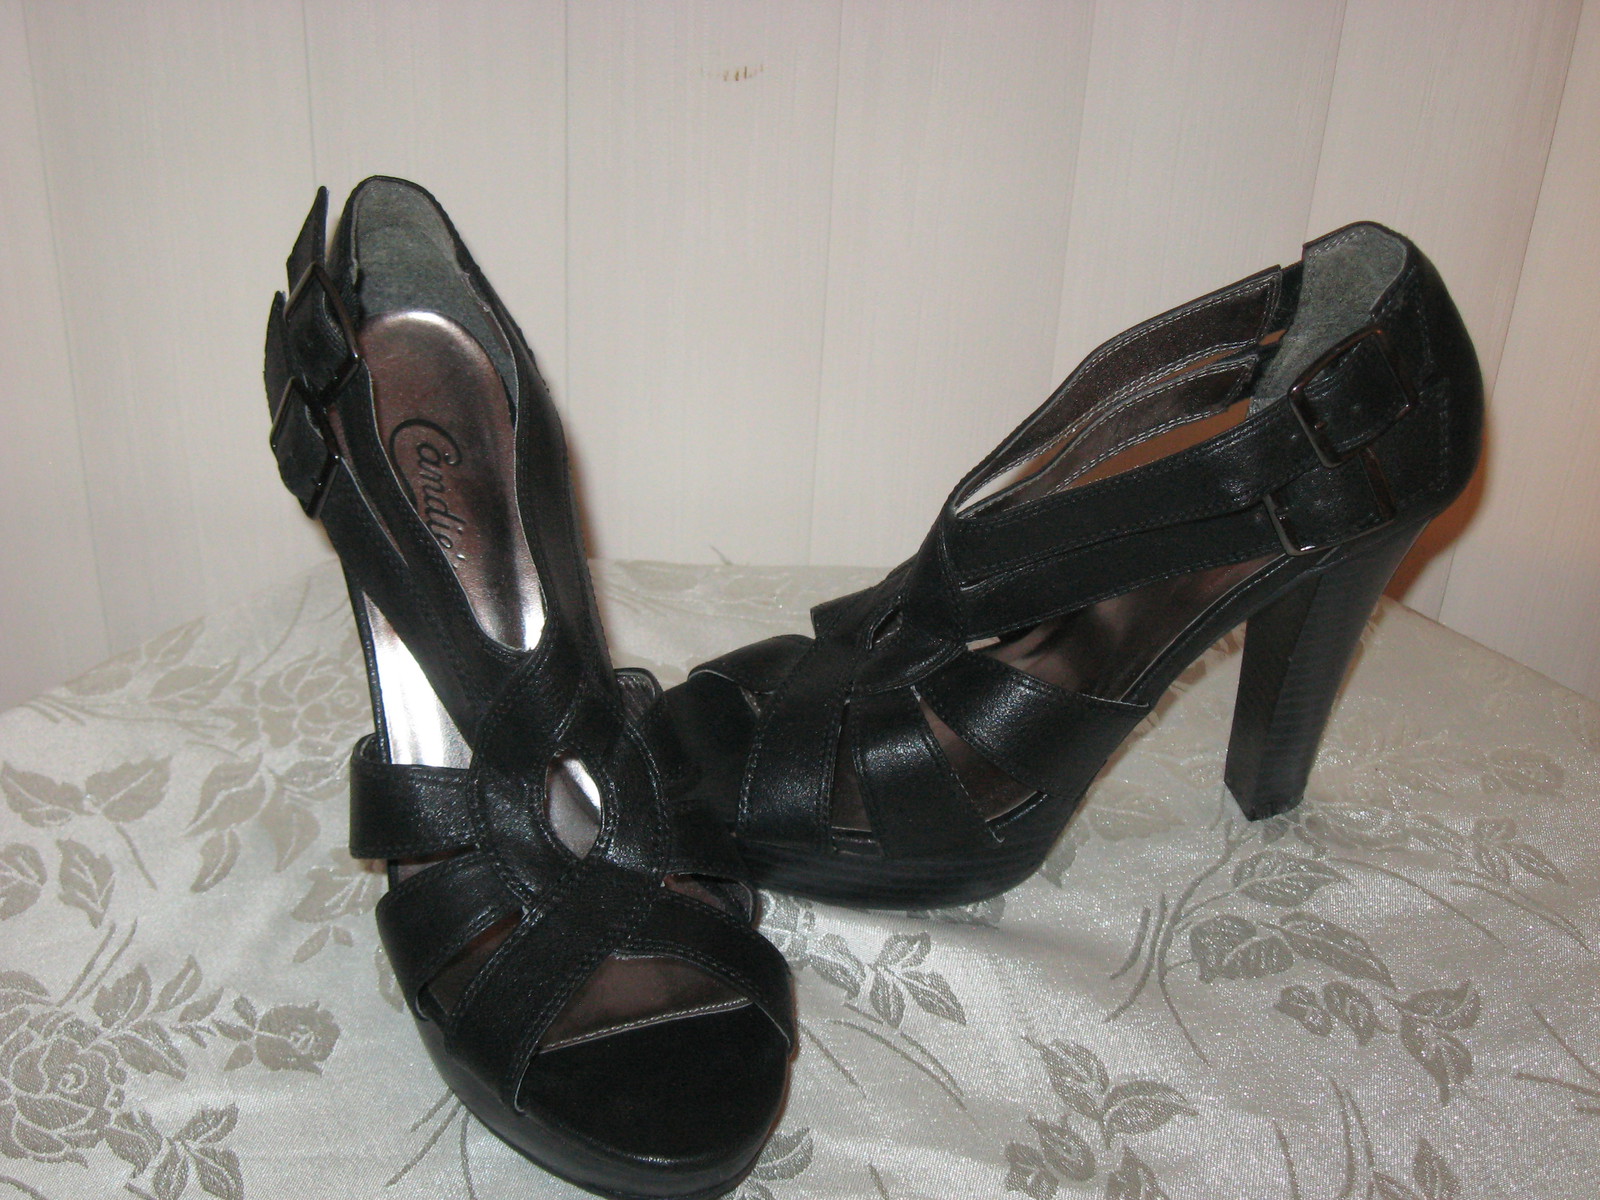 Candie's High Heels Sandal Shoes Double Buckle Strap Black 7.5 Med - $16.99